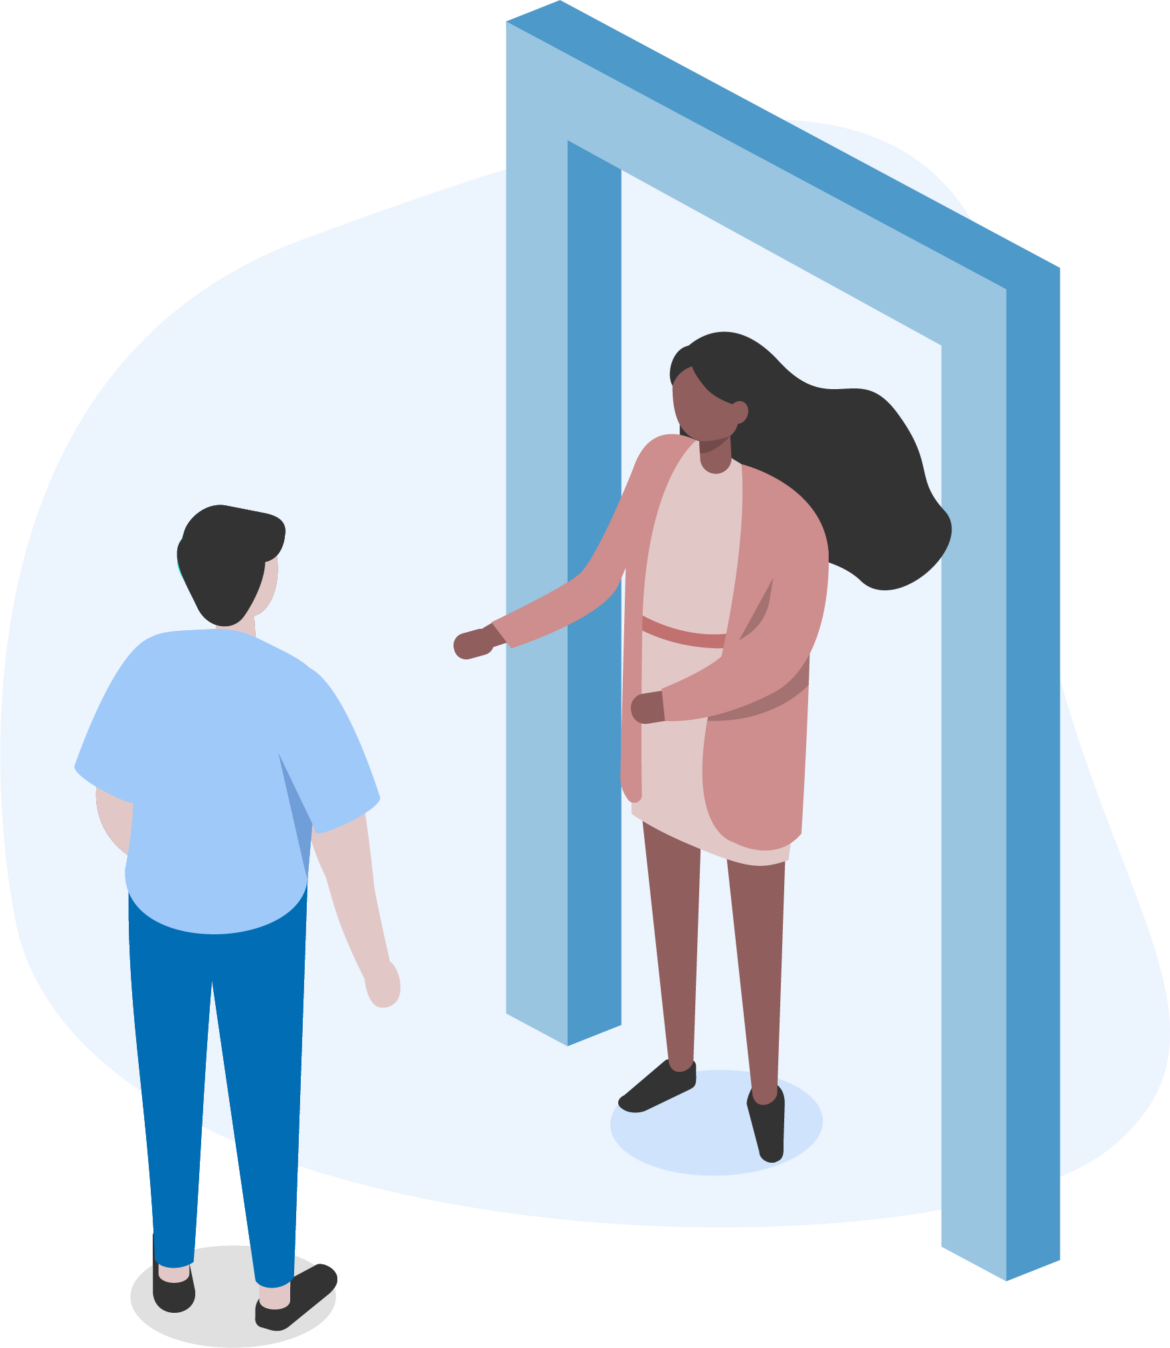 Vector illustration of a woman wearing a coral pink dress, standing in a doorway, facing a man wearing blue.